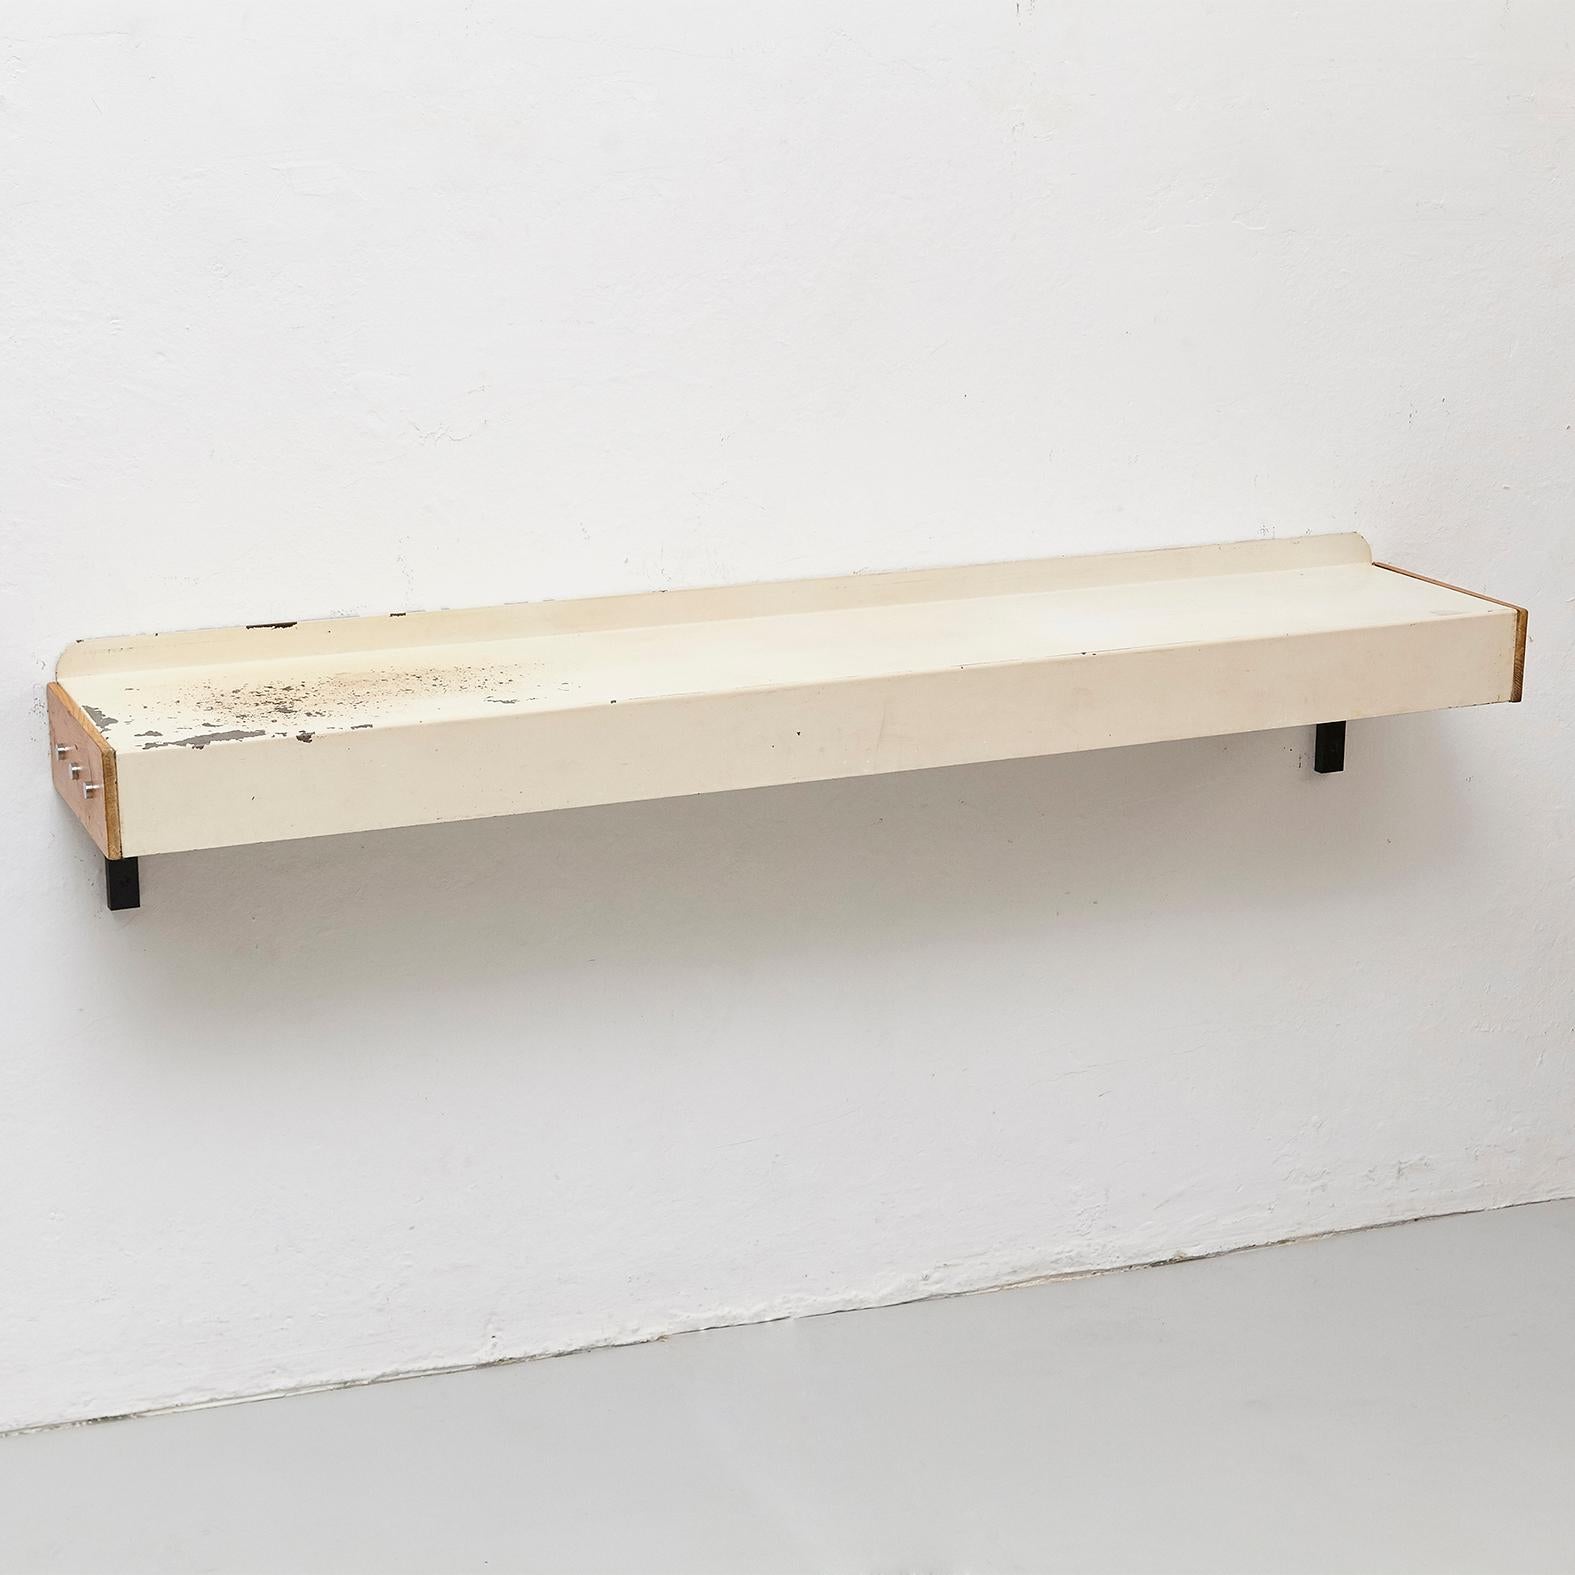 Shelve designed by Charlotte Perriand for Les Arcs circa 1960, manufactured in France.
Pinewood and metal 

In good original condition, with minor wear consistent with age and use, preserving a beautiful patina.

Charlotte Perriand (1903-1999): She